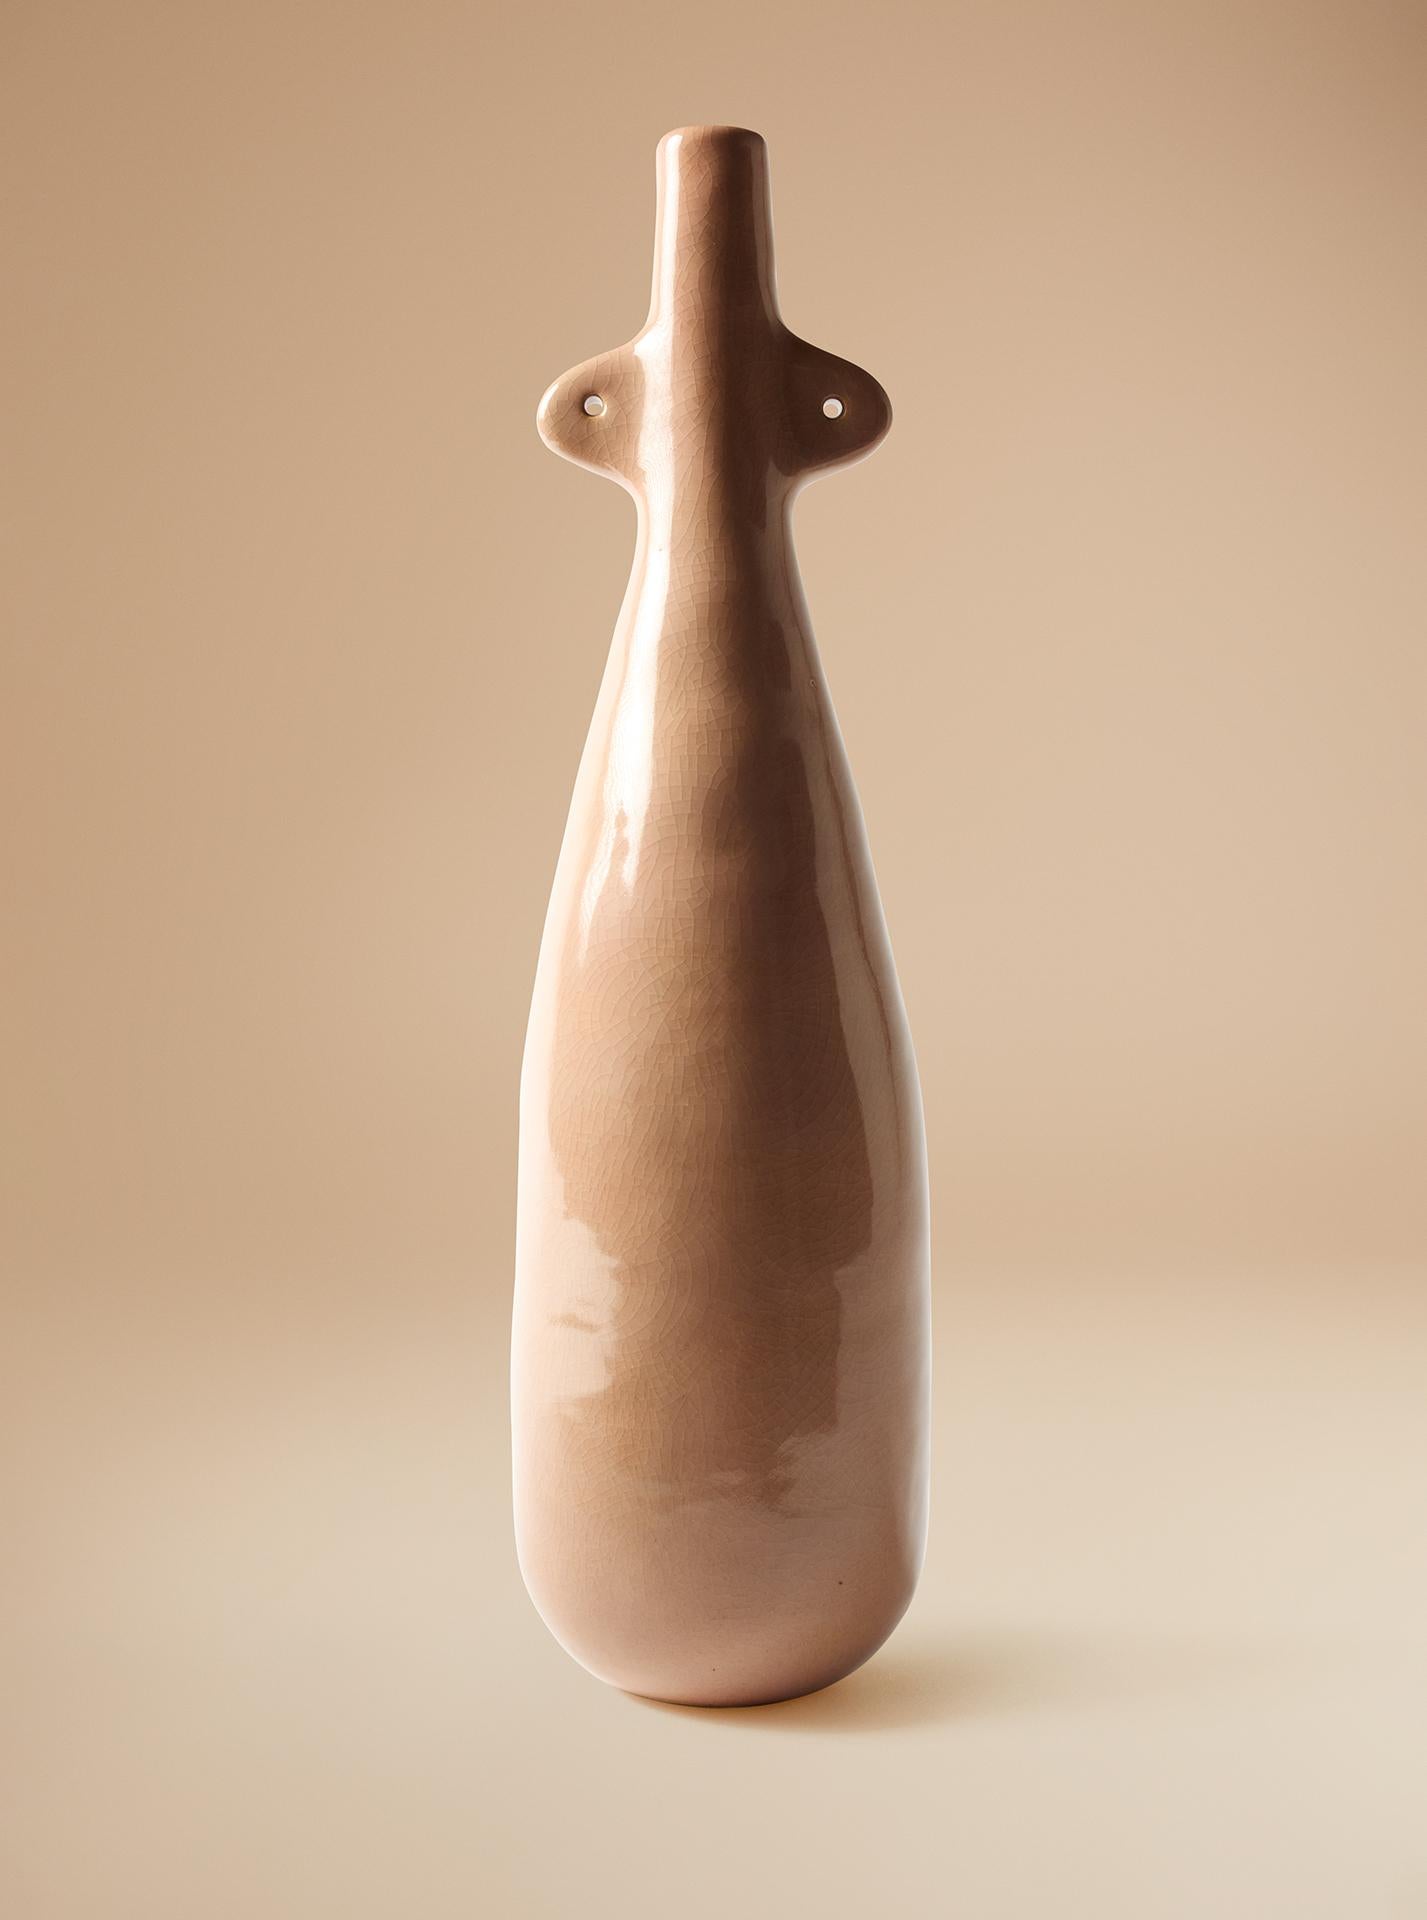 South African Vessels 02, 05 & 06 in Textured Stoneware Clay. Handmade by Jade Paton for Lemon